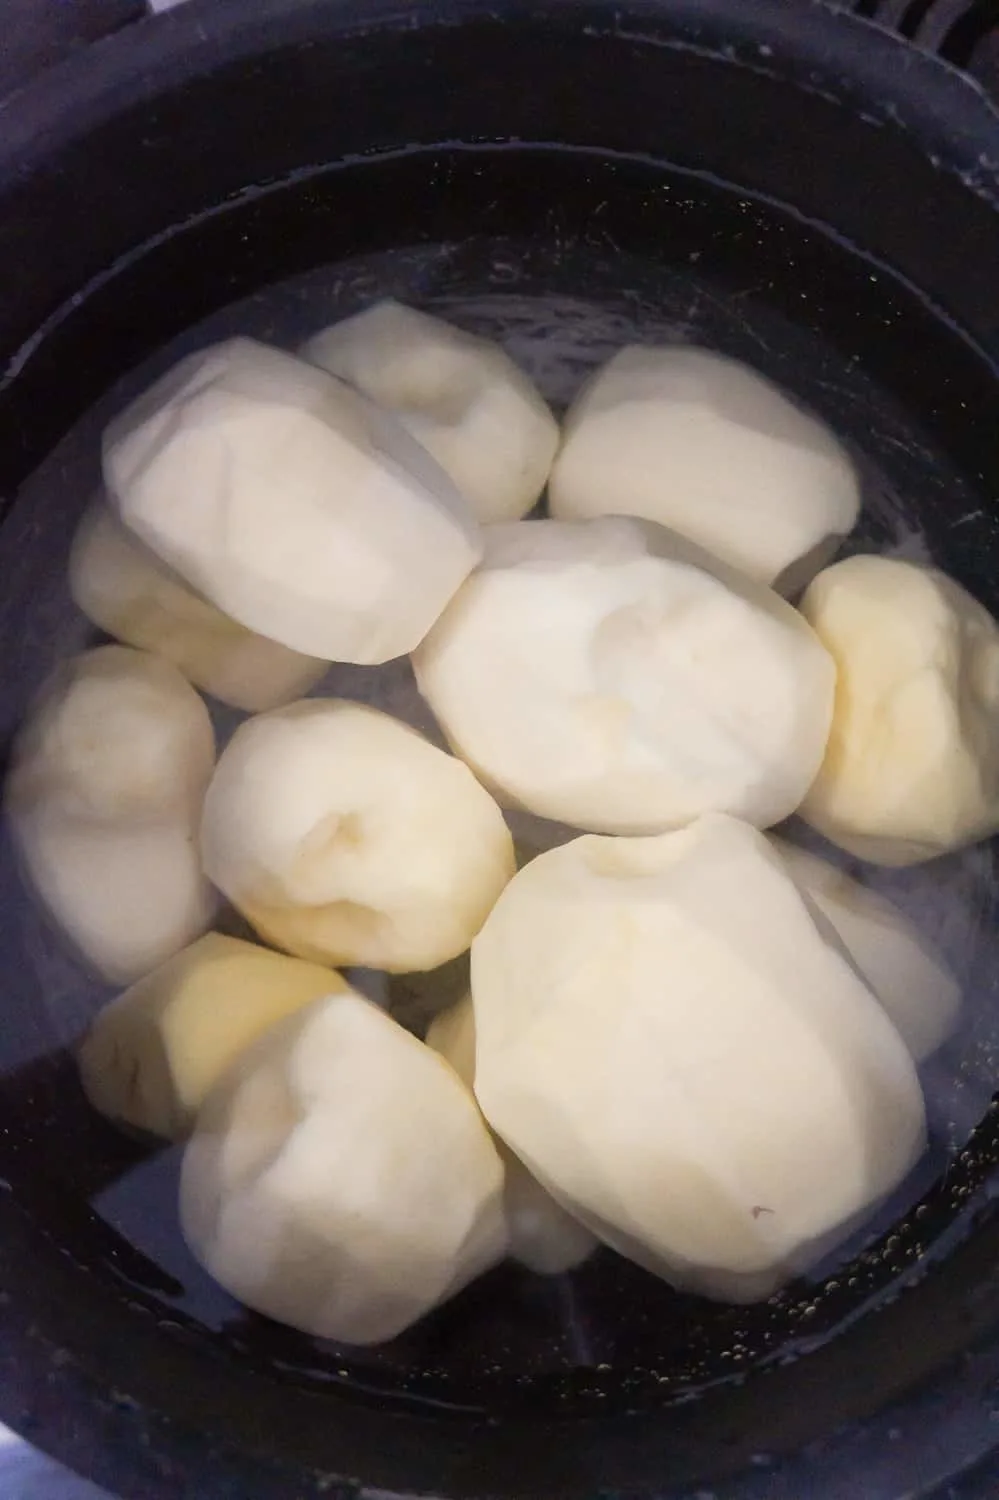 peeled potatoes in a pot of water